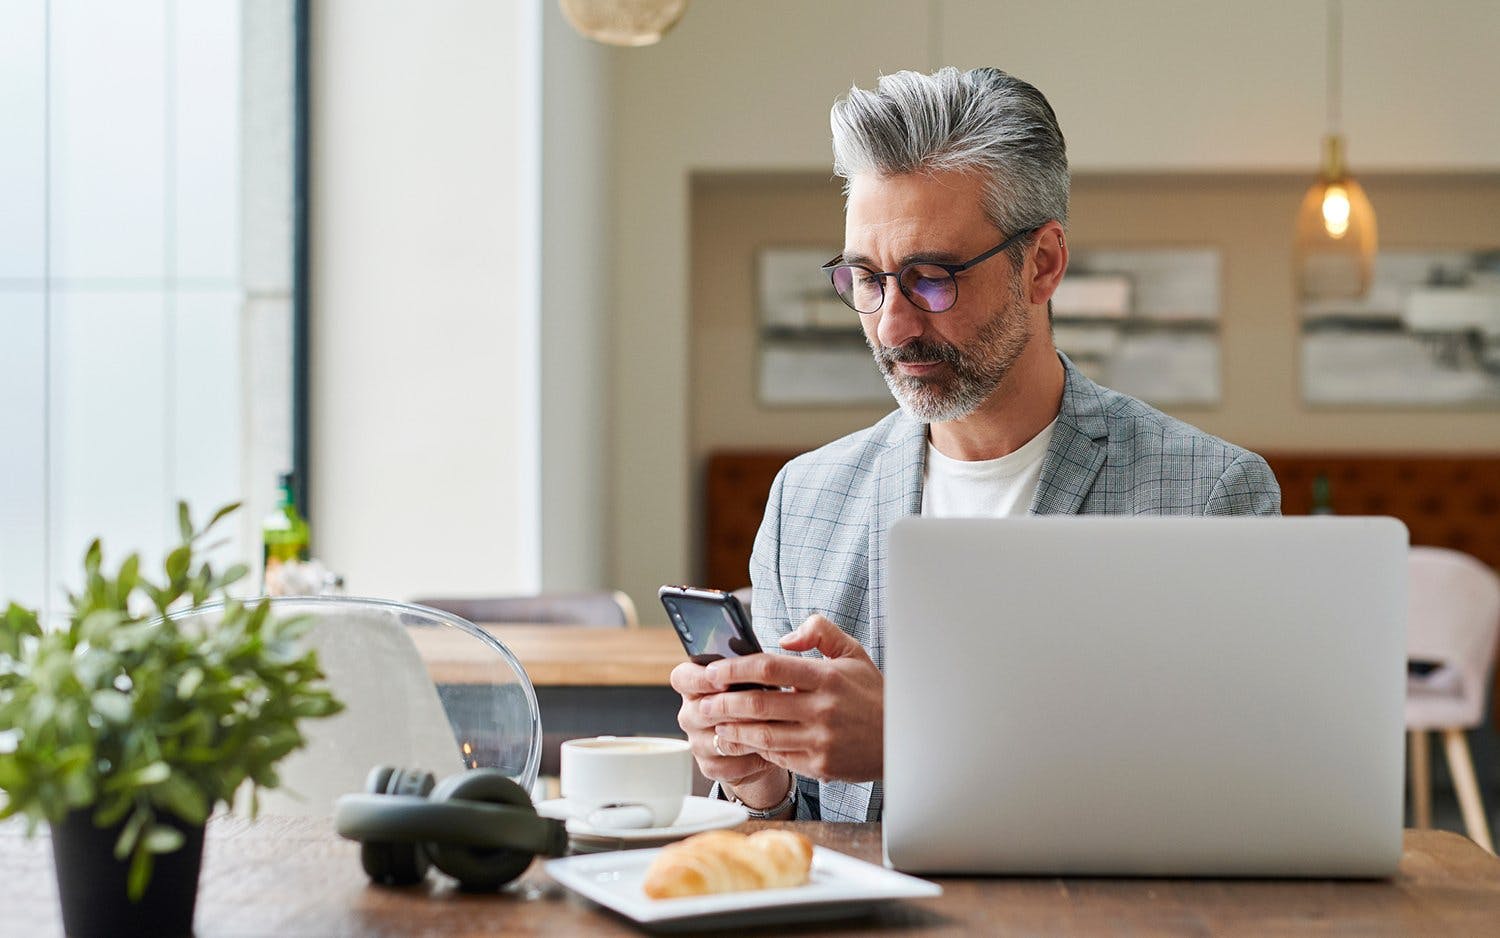 Man looking at mobile device while also sitting in front of laptop